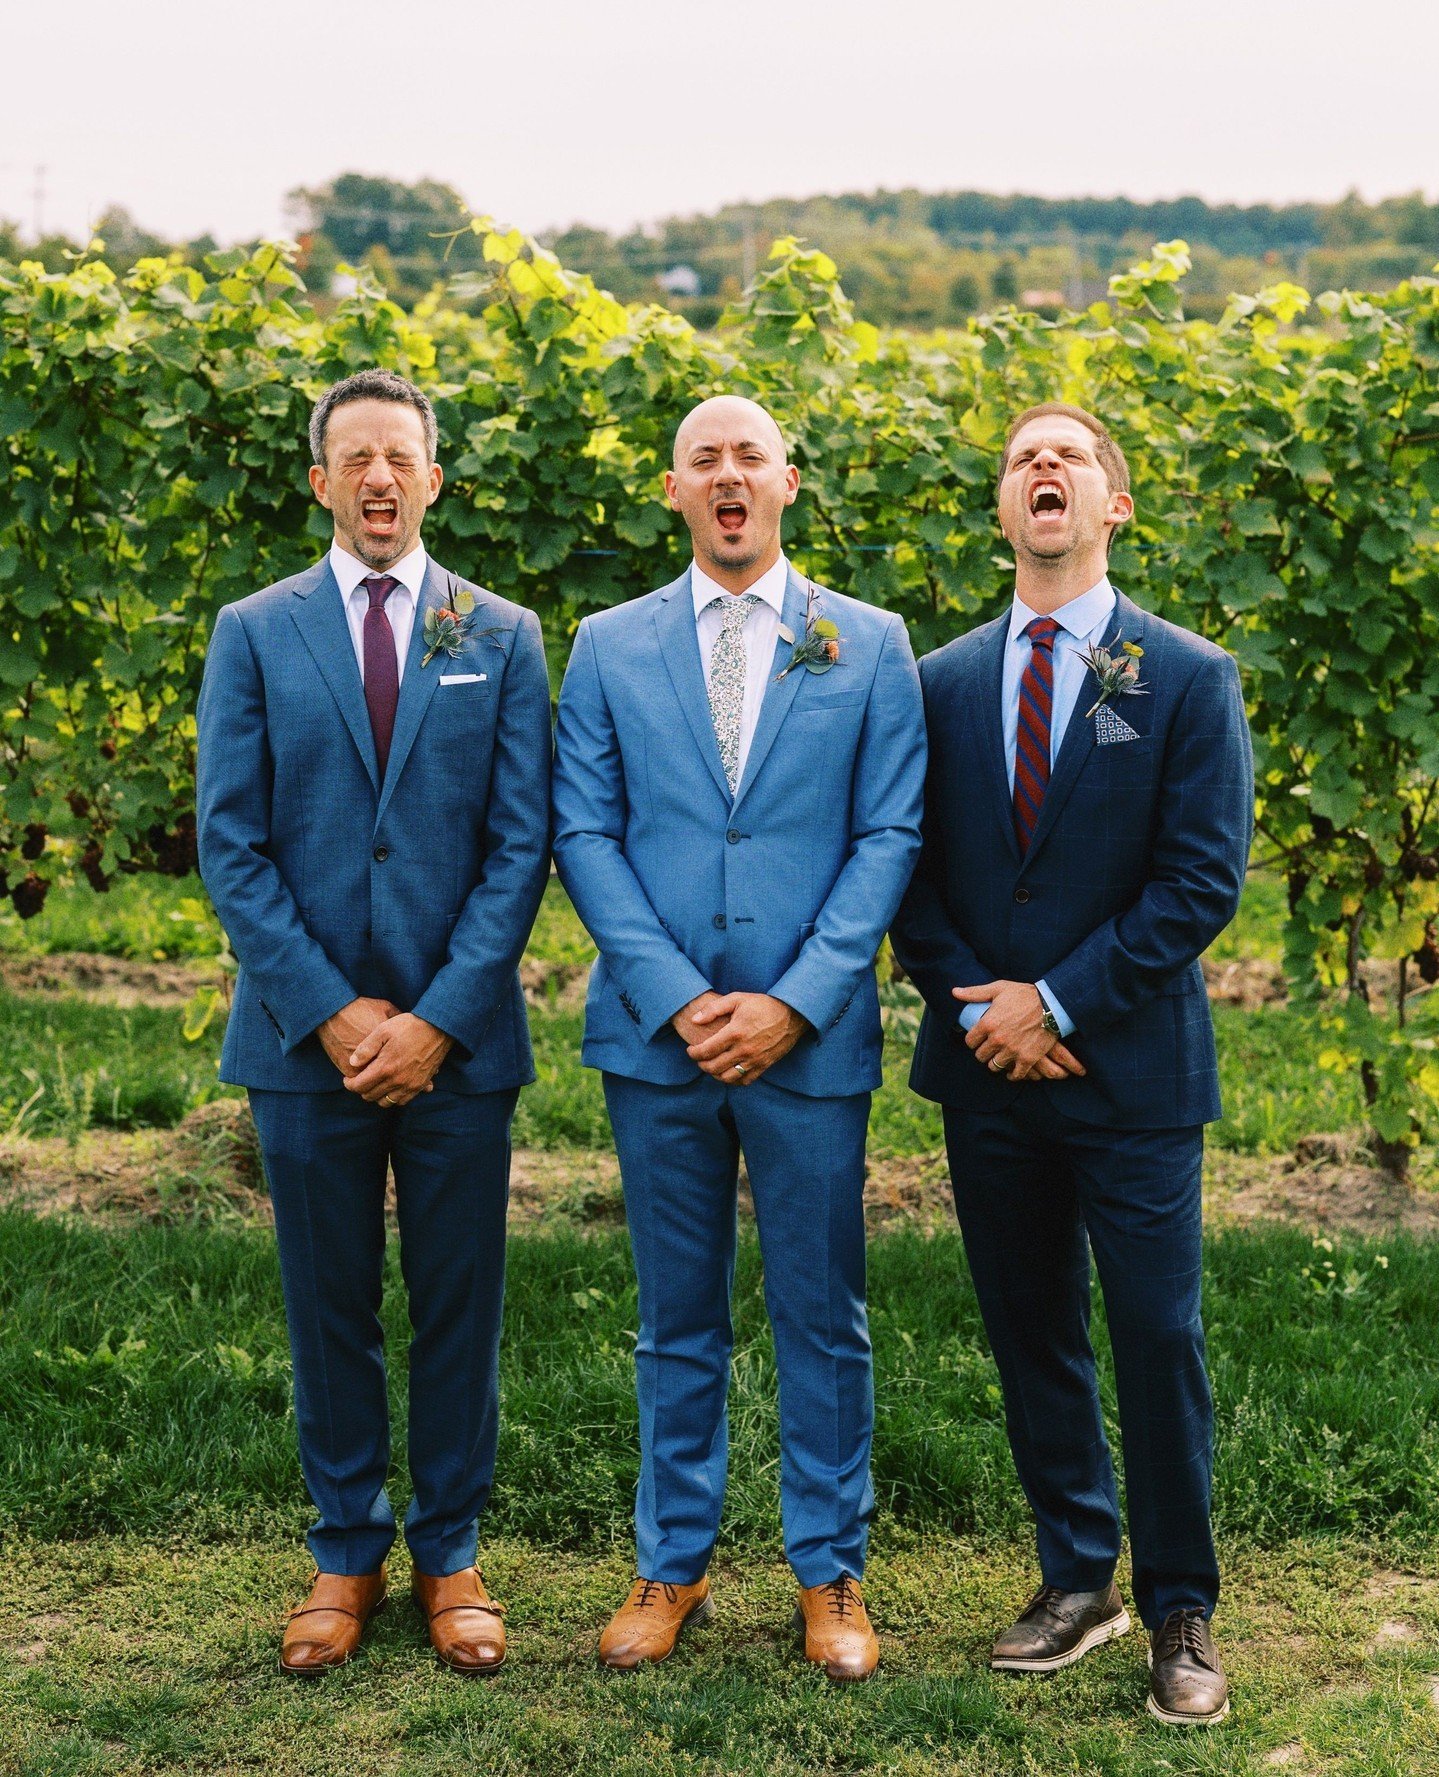 The friends that yawn together, stay together. 🥱⁠
⁠
⁠
⁠
.⁠
.⁠
.⁠
⁠
#traversecityweddingphotographer #traversecitywedding #traversecityweddings #traversecityphotographer #traversecityweddingphotography #michiganweddingphotographer #michiganweddingpho